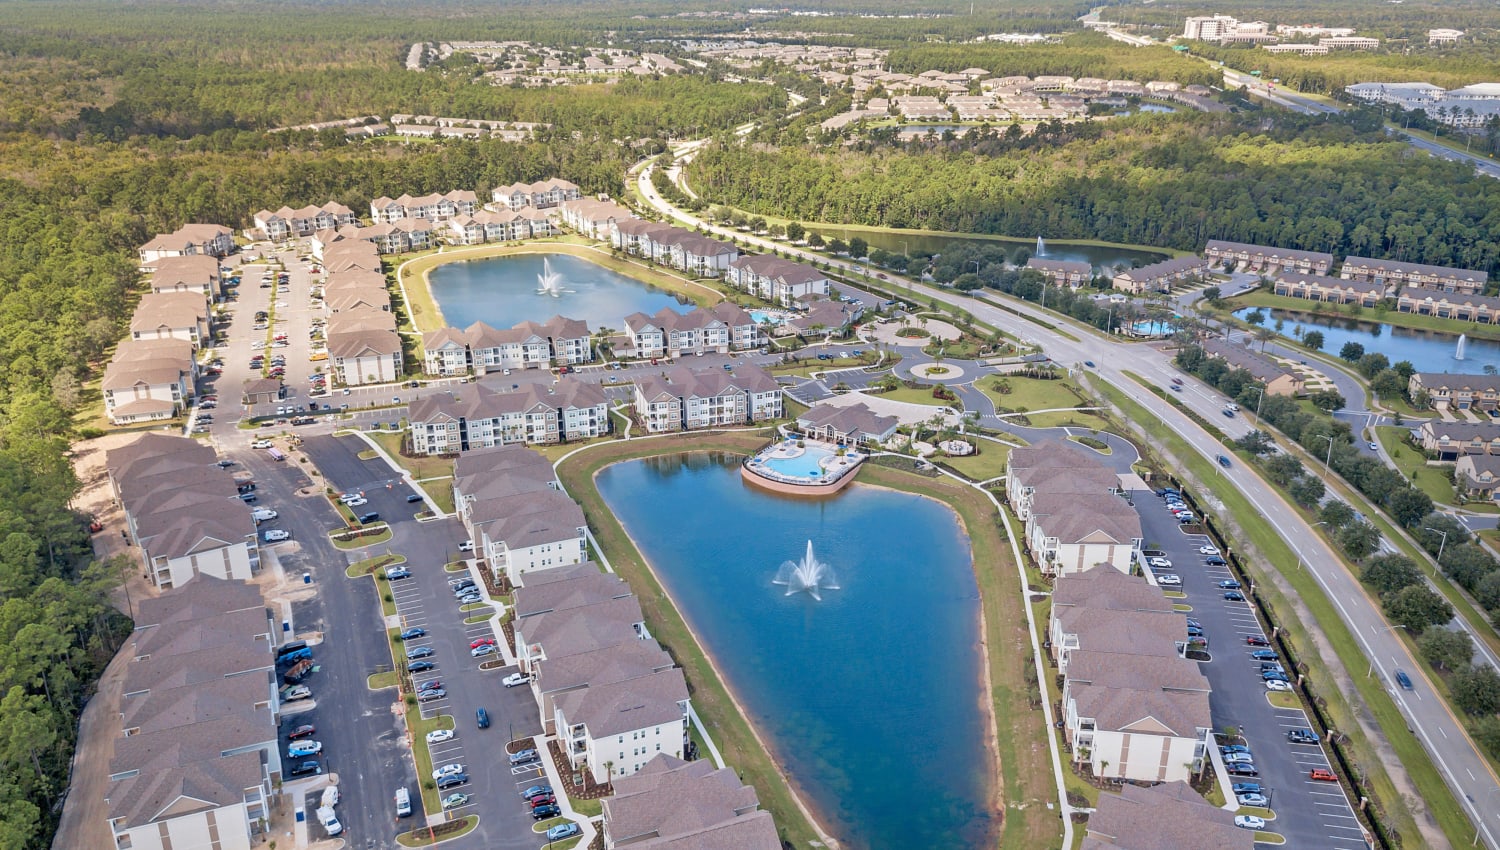 Stunning aerial view of The Carlton at Bartram Park in Jacksonville, Florida